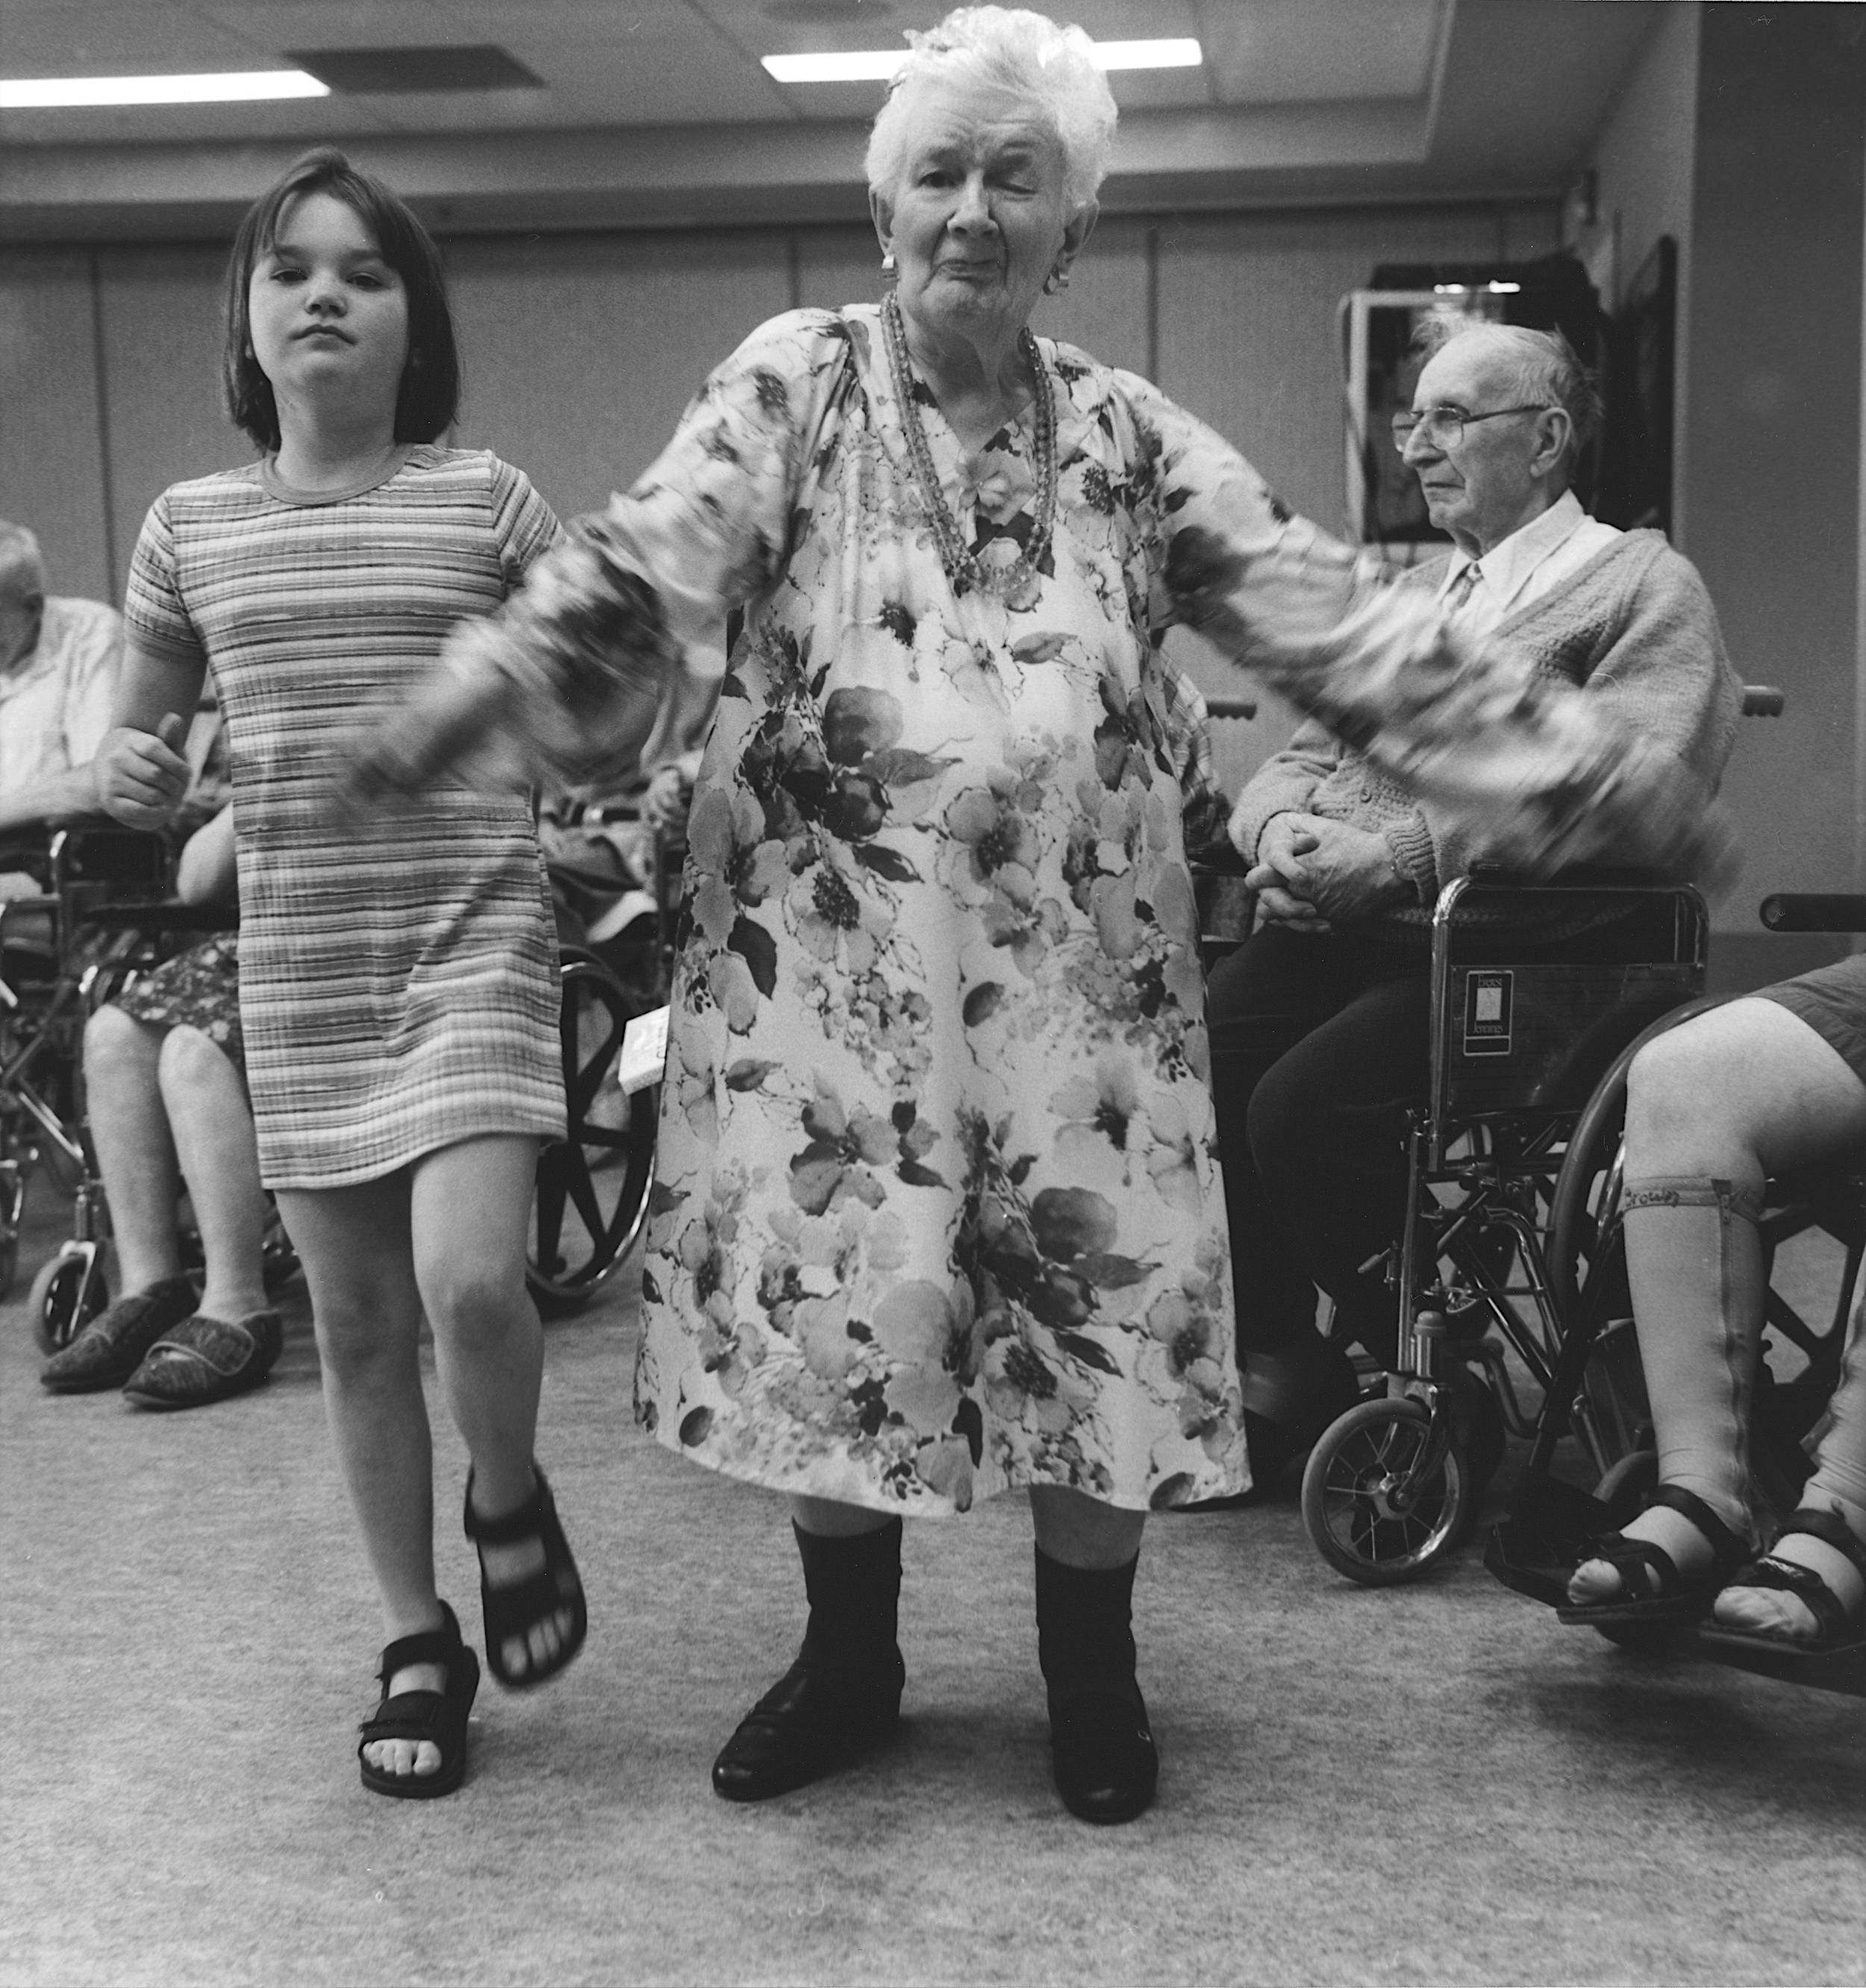 Black and white photo of elderly woman wearing beautiful patterned dress dancing beside young girl with two people in wheelchairs in background.